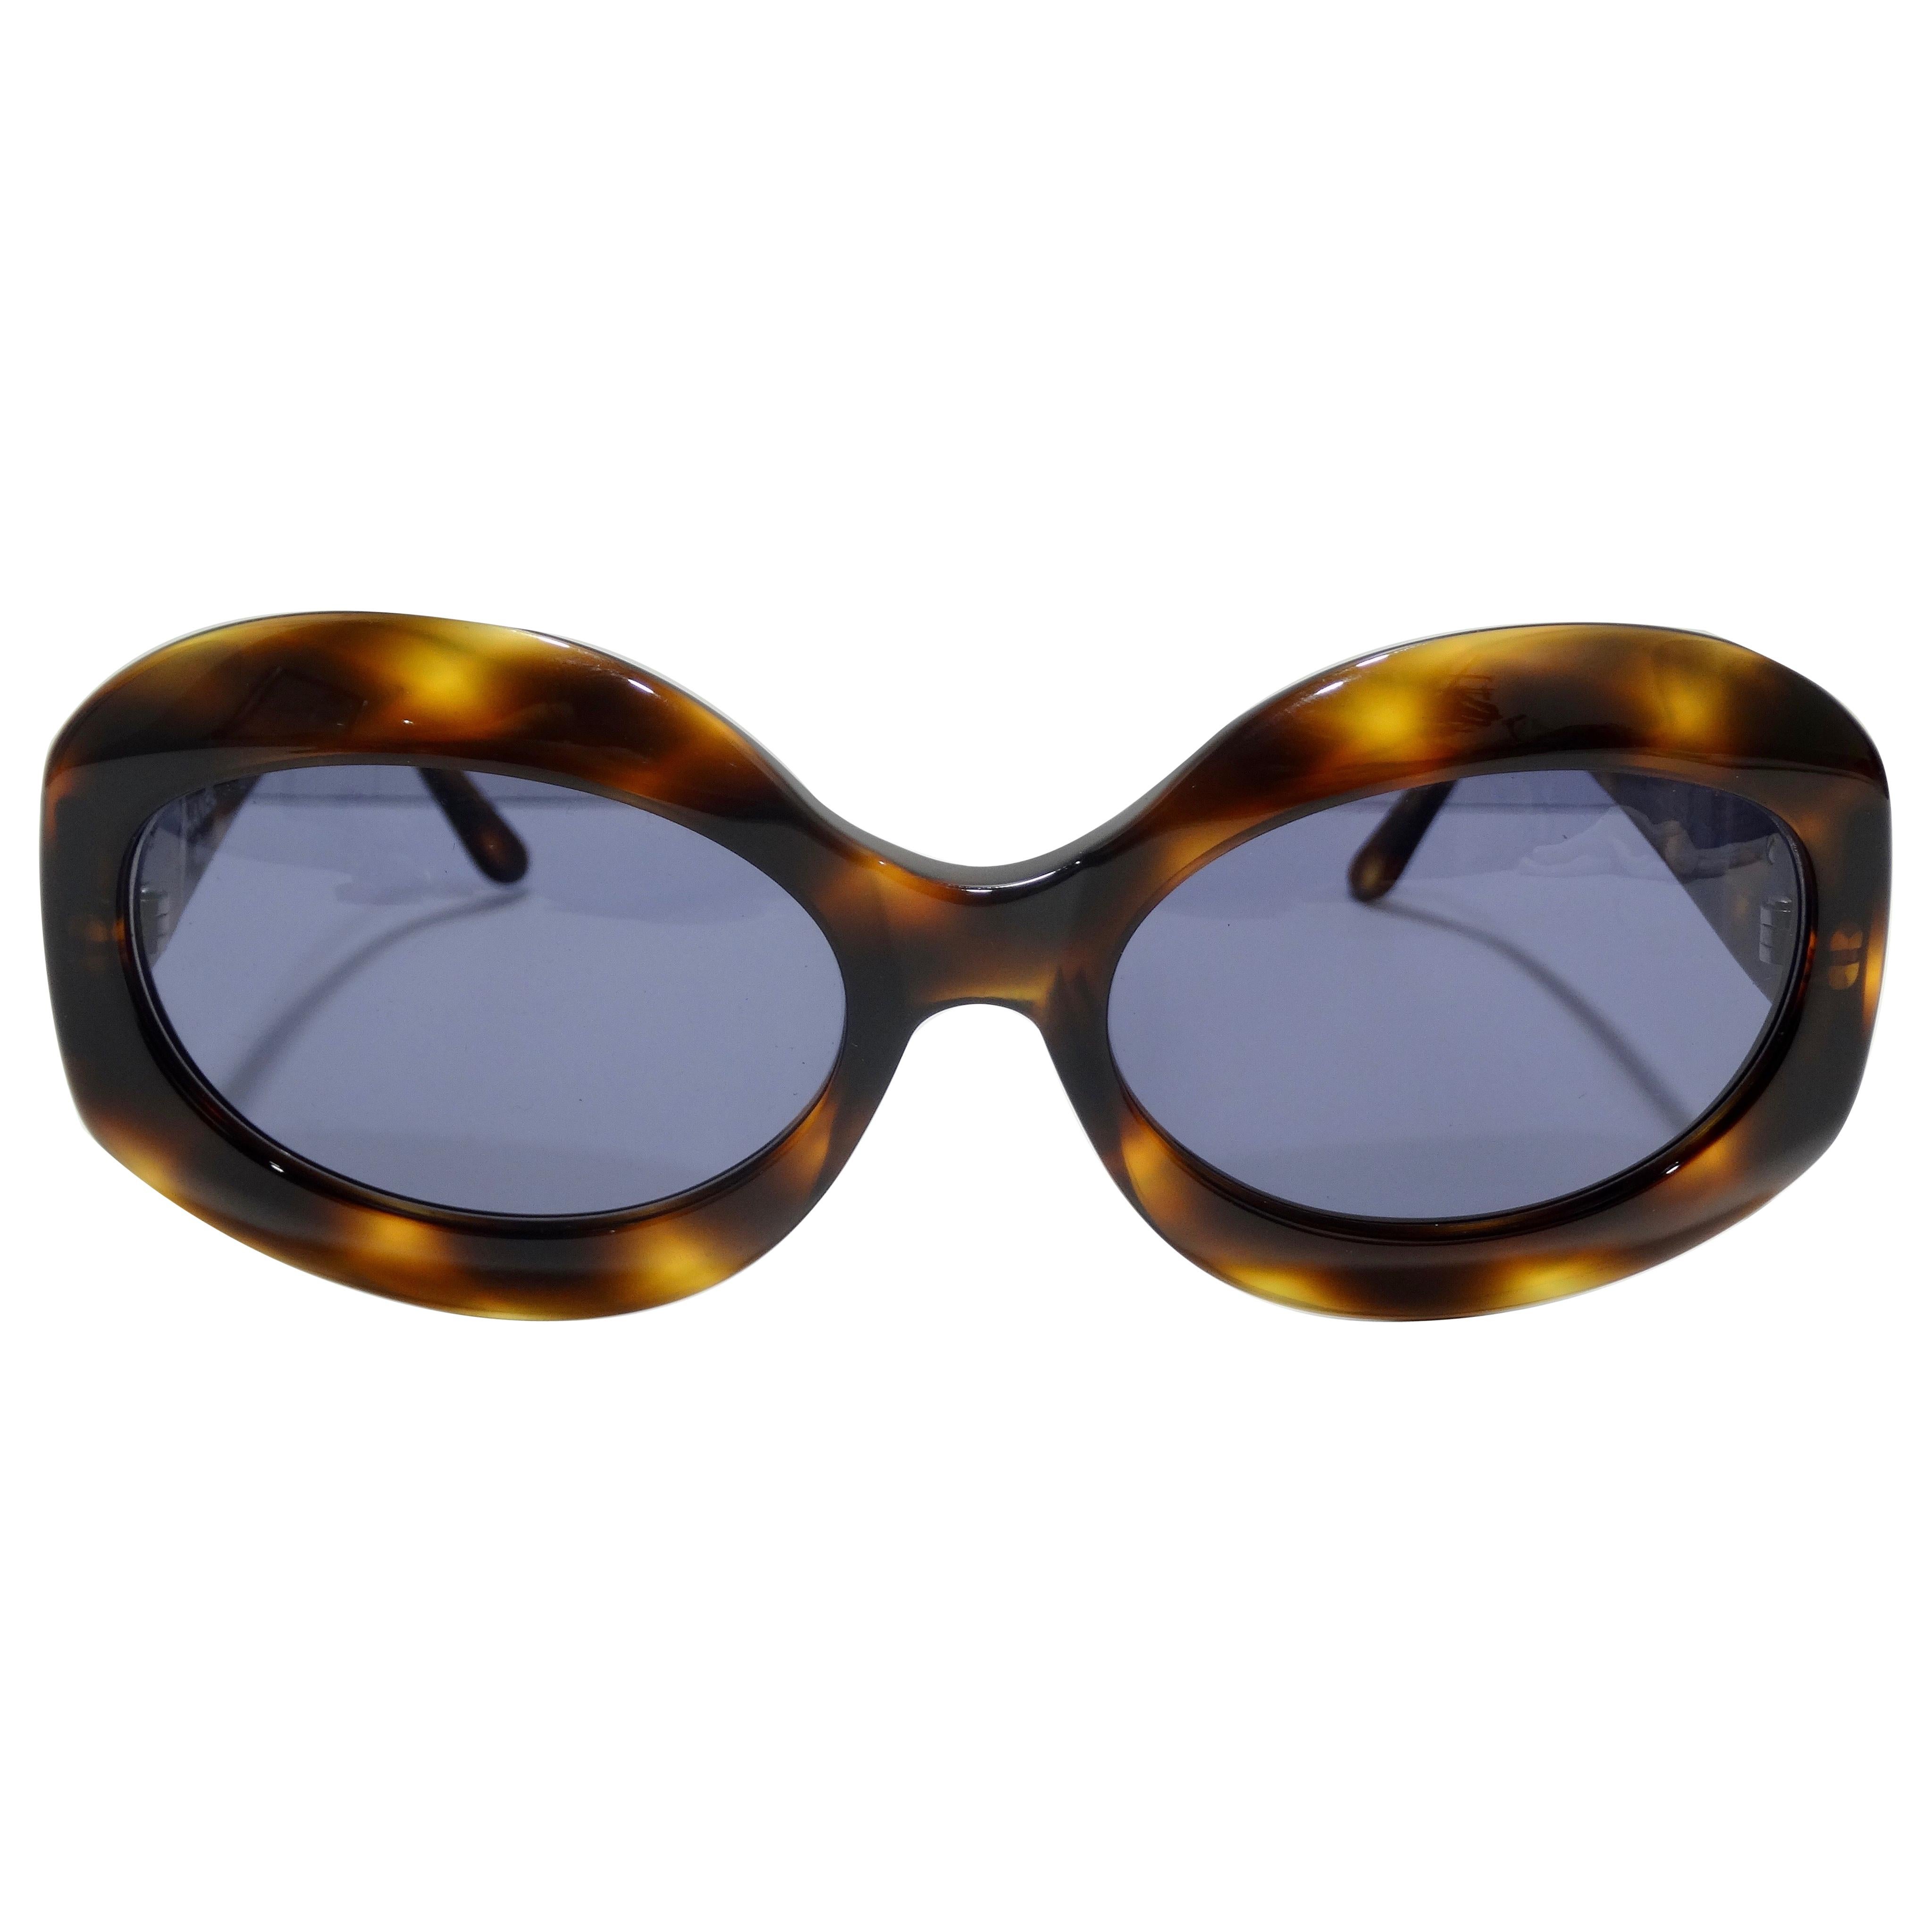 Vintage CHANEL Tortoise shell wrap sunglasses by Chanel